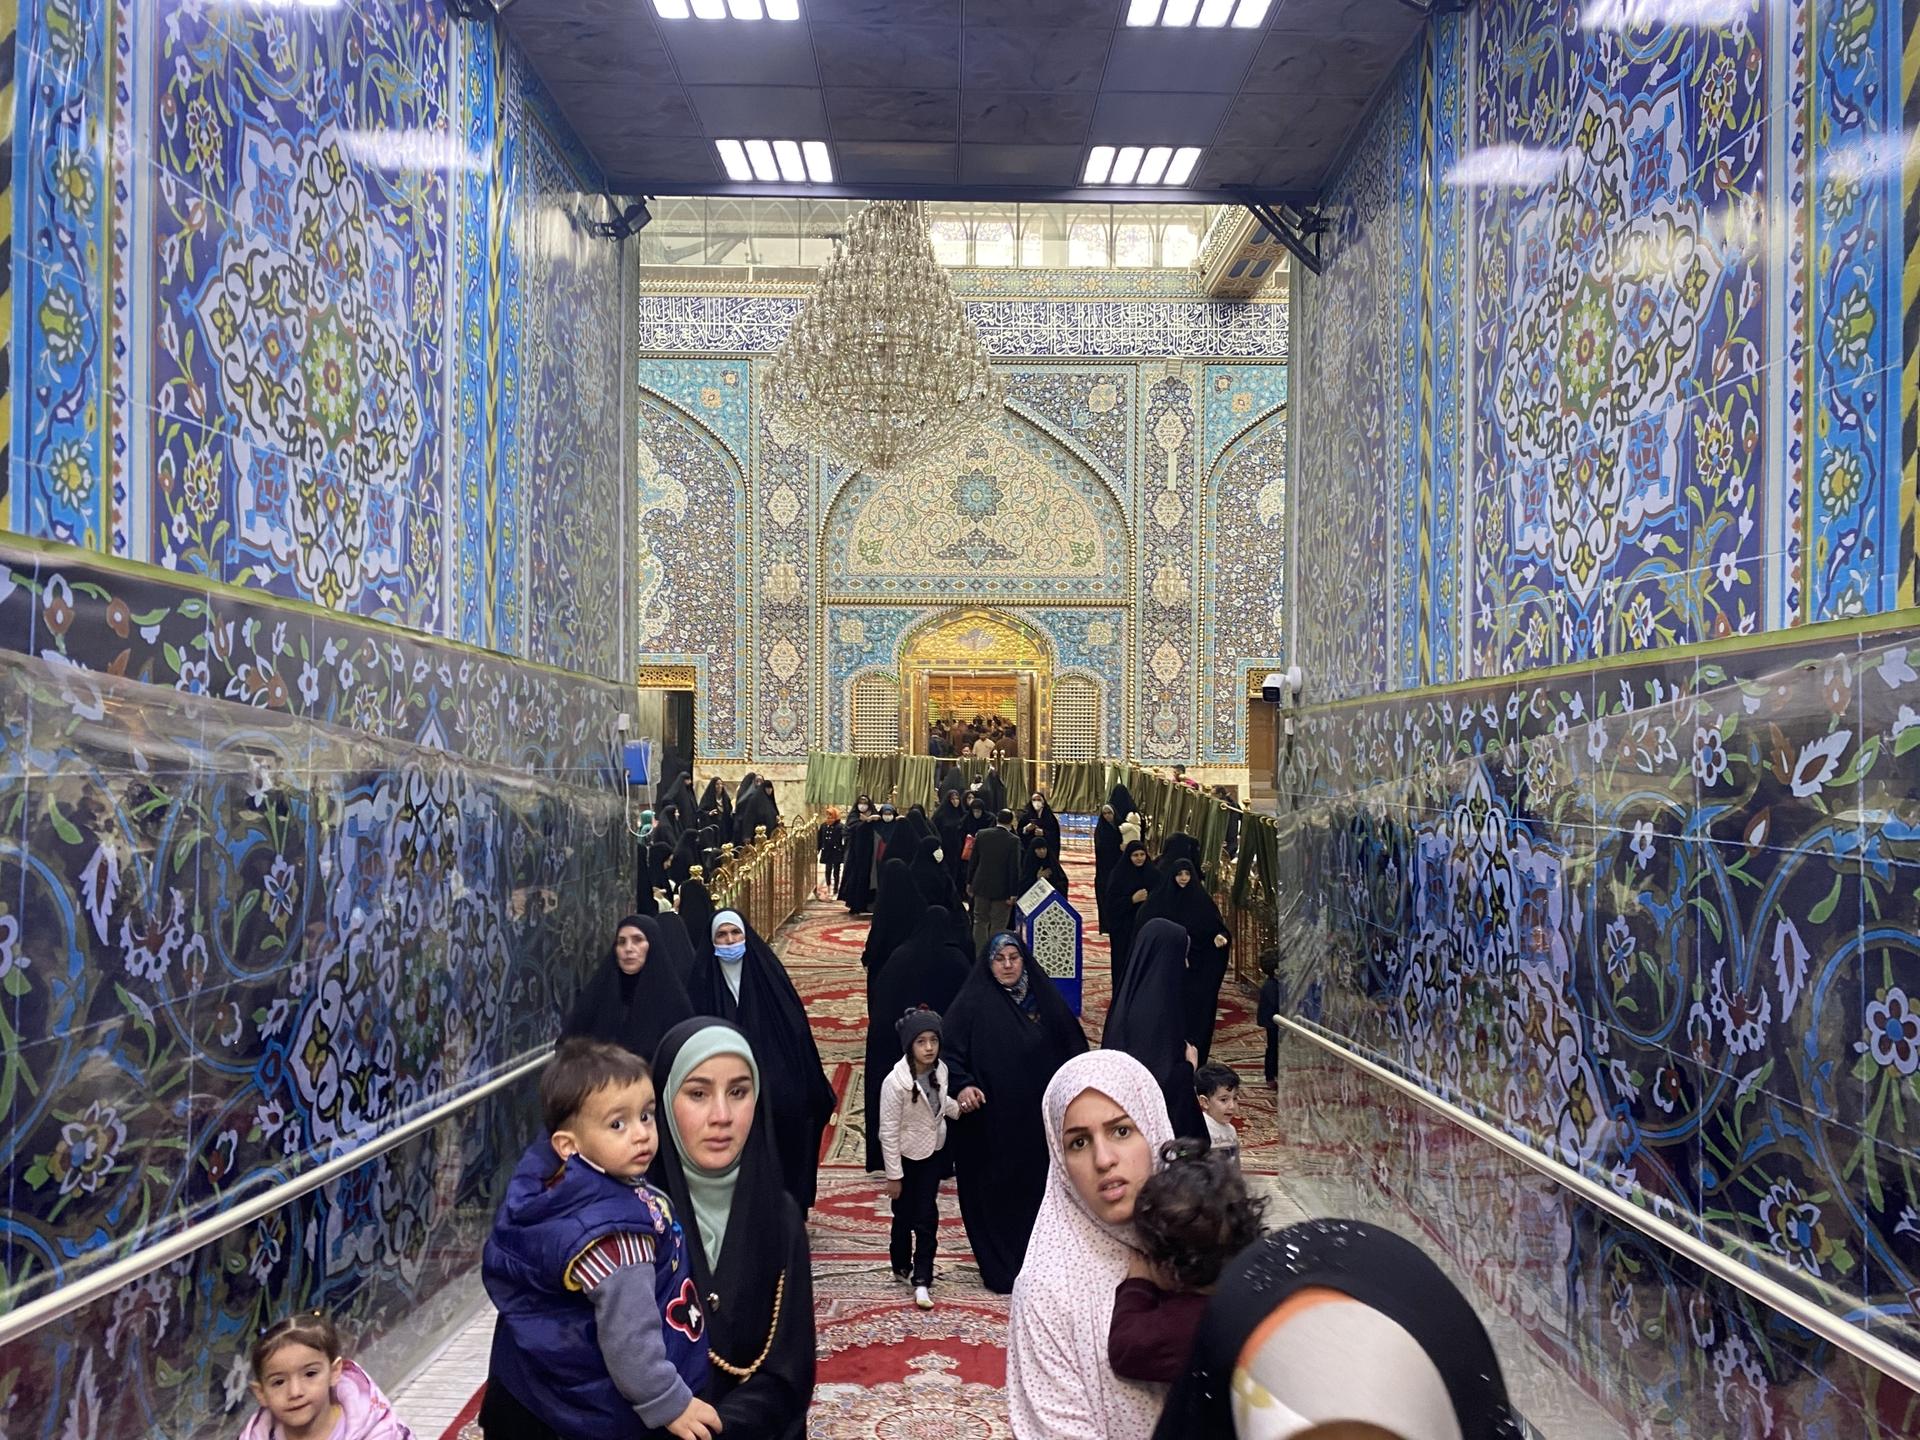 Women and children stream out of the Imam Abbas shrine in Iraq’s holy city of Karbala on Dec. 7, 2021.